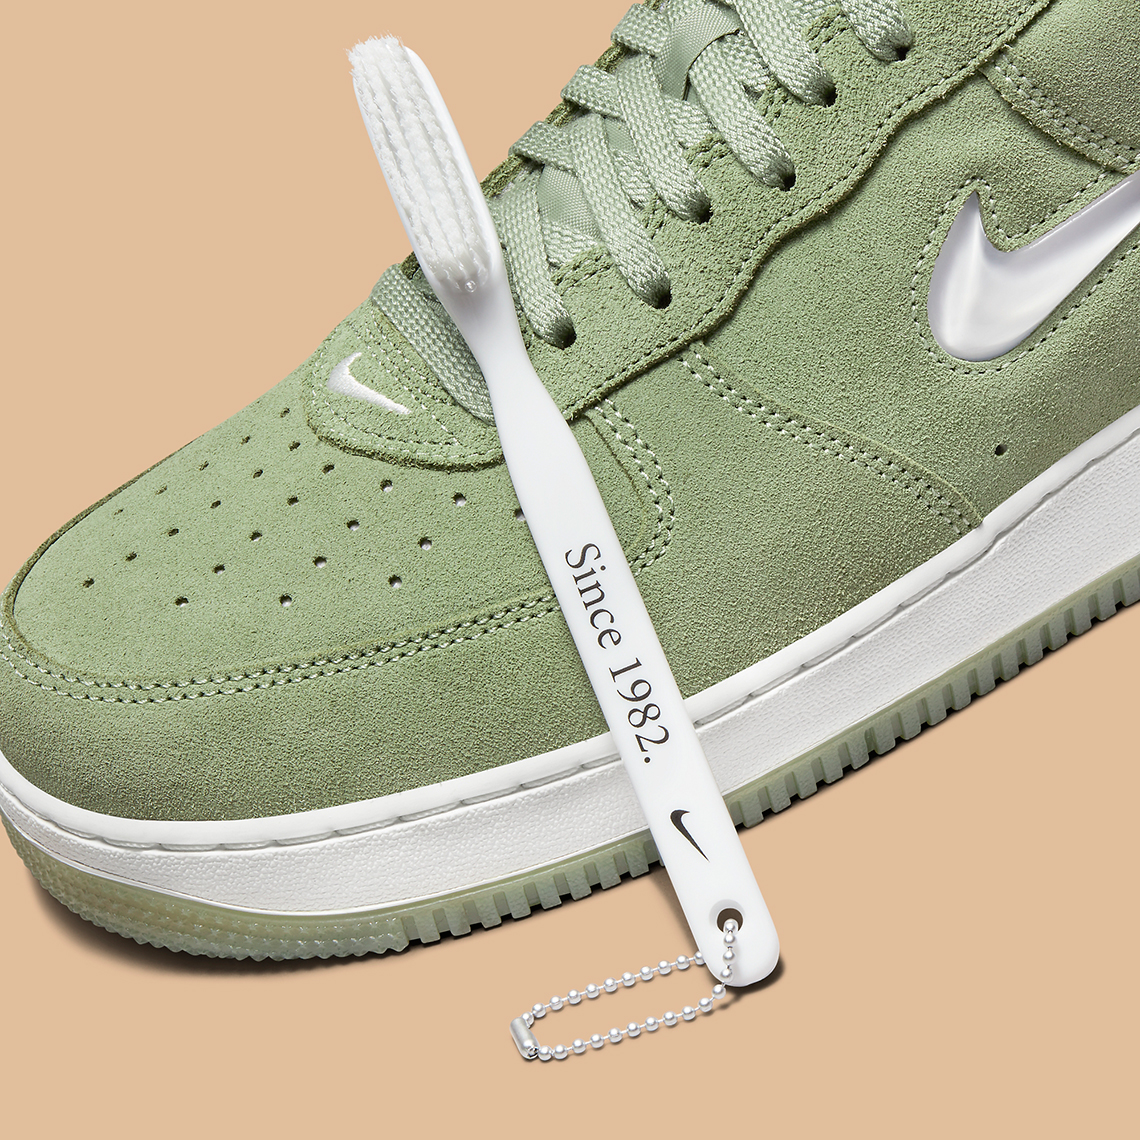 Nike Air Force 1 Low Color Of The Month Green Suede Dv0785 300 2